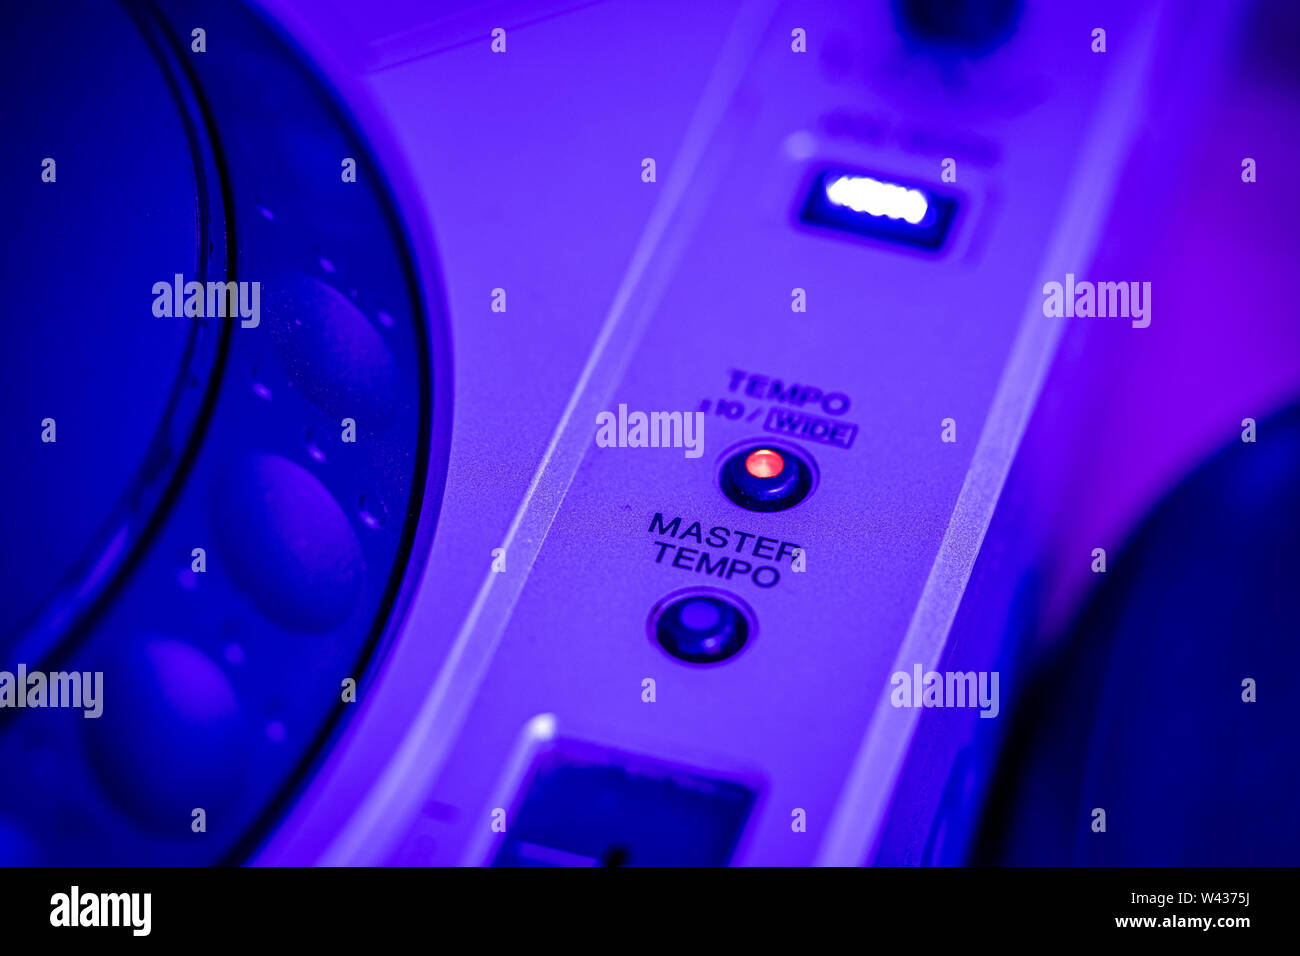 JULY 19, 2019 - MALAGA, SPAIN. Closeup of Master Tempo control on a Pioneer CDJ 800 Mk2 CD Player. Blue stage lighting. Stock Photo